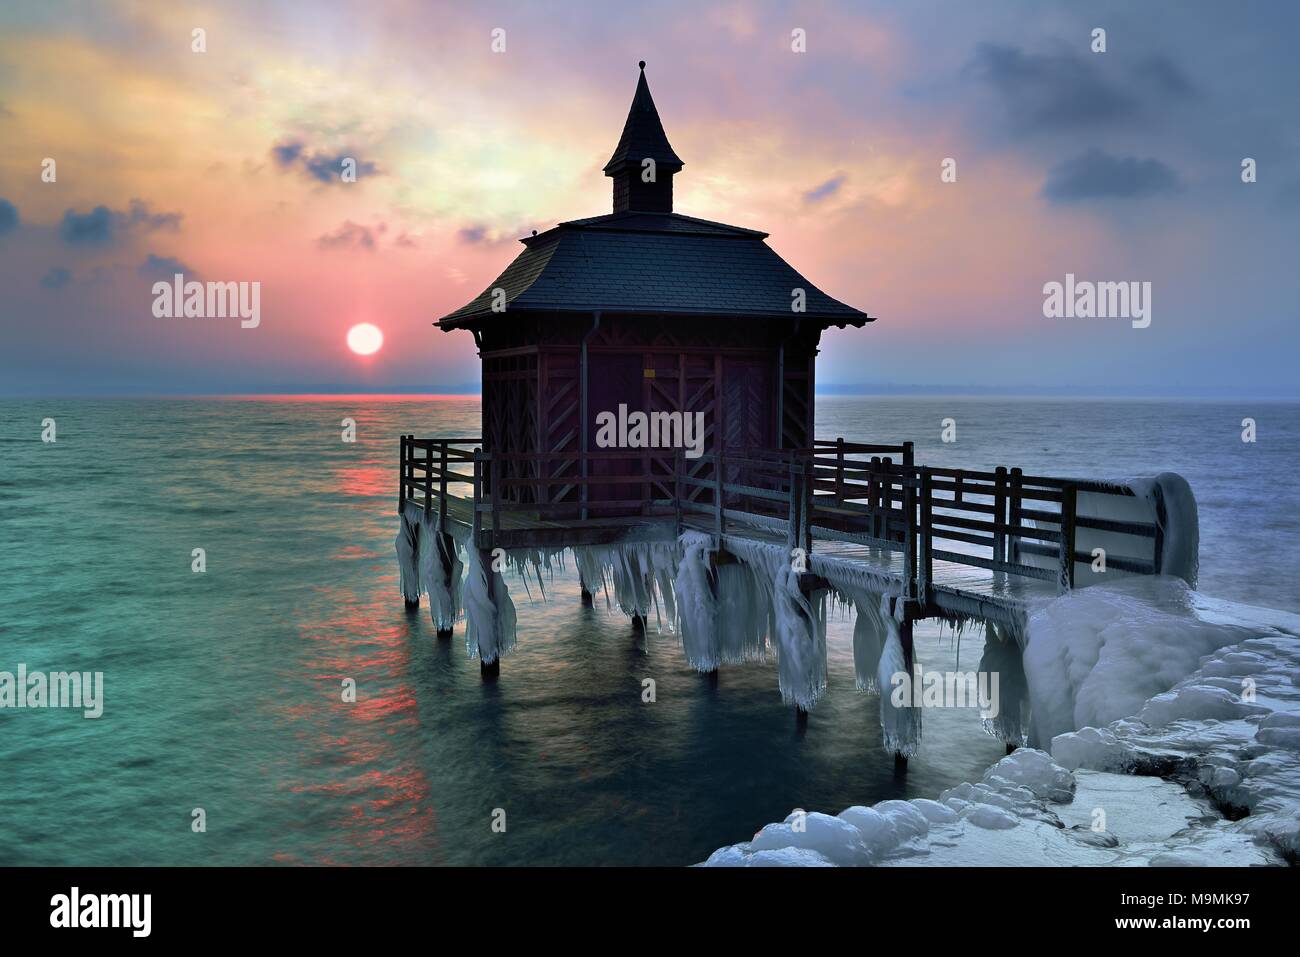 Bathhouse on pier with icicle in winter at sunrise, Lake Neuchâtel, Gorgier, Canton Neuchâtel, Switzerland Stock Photo